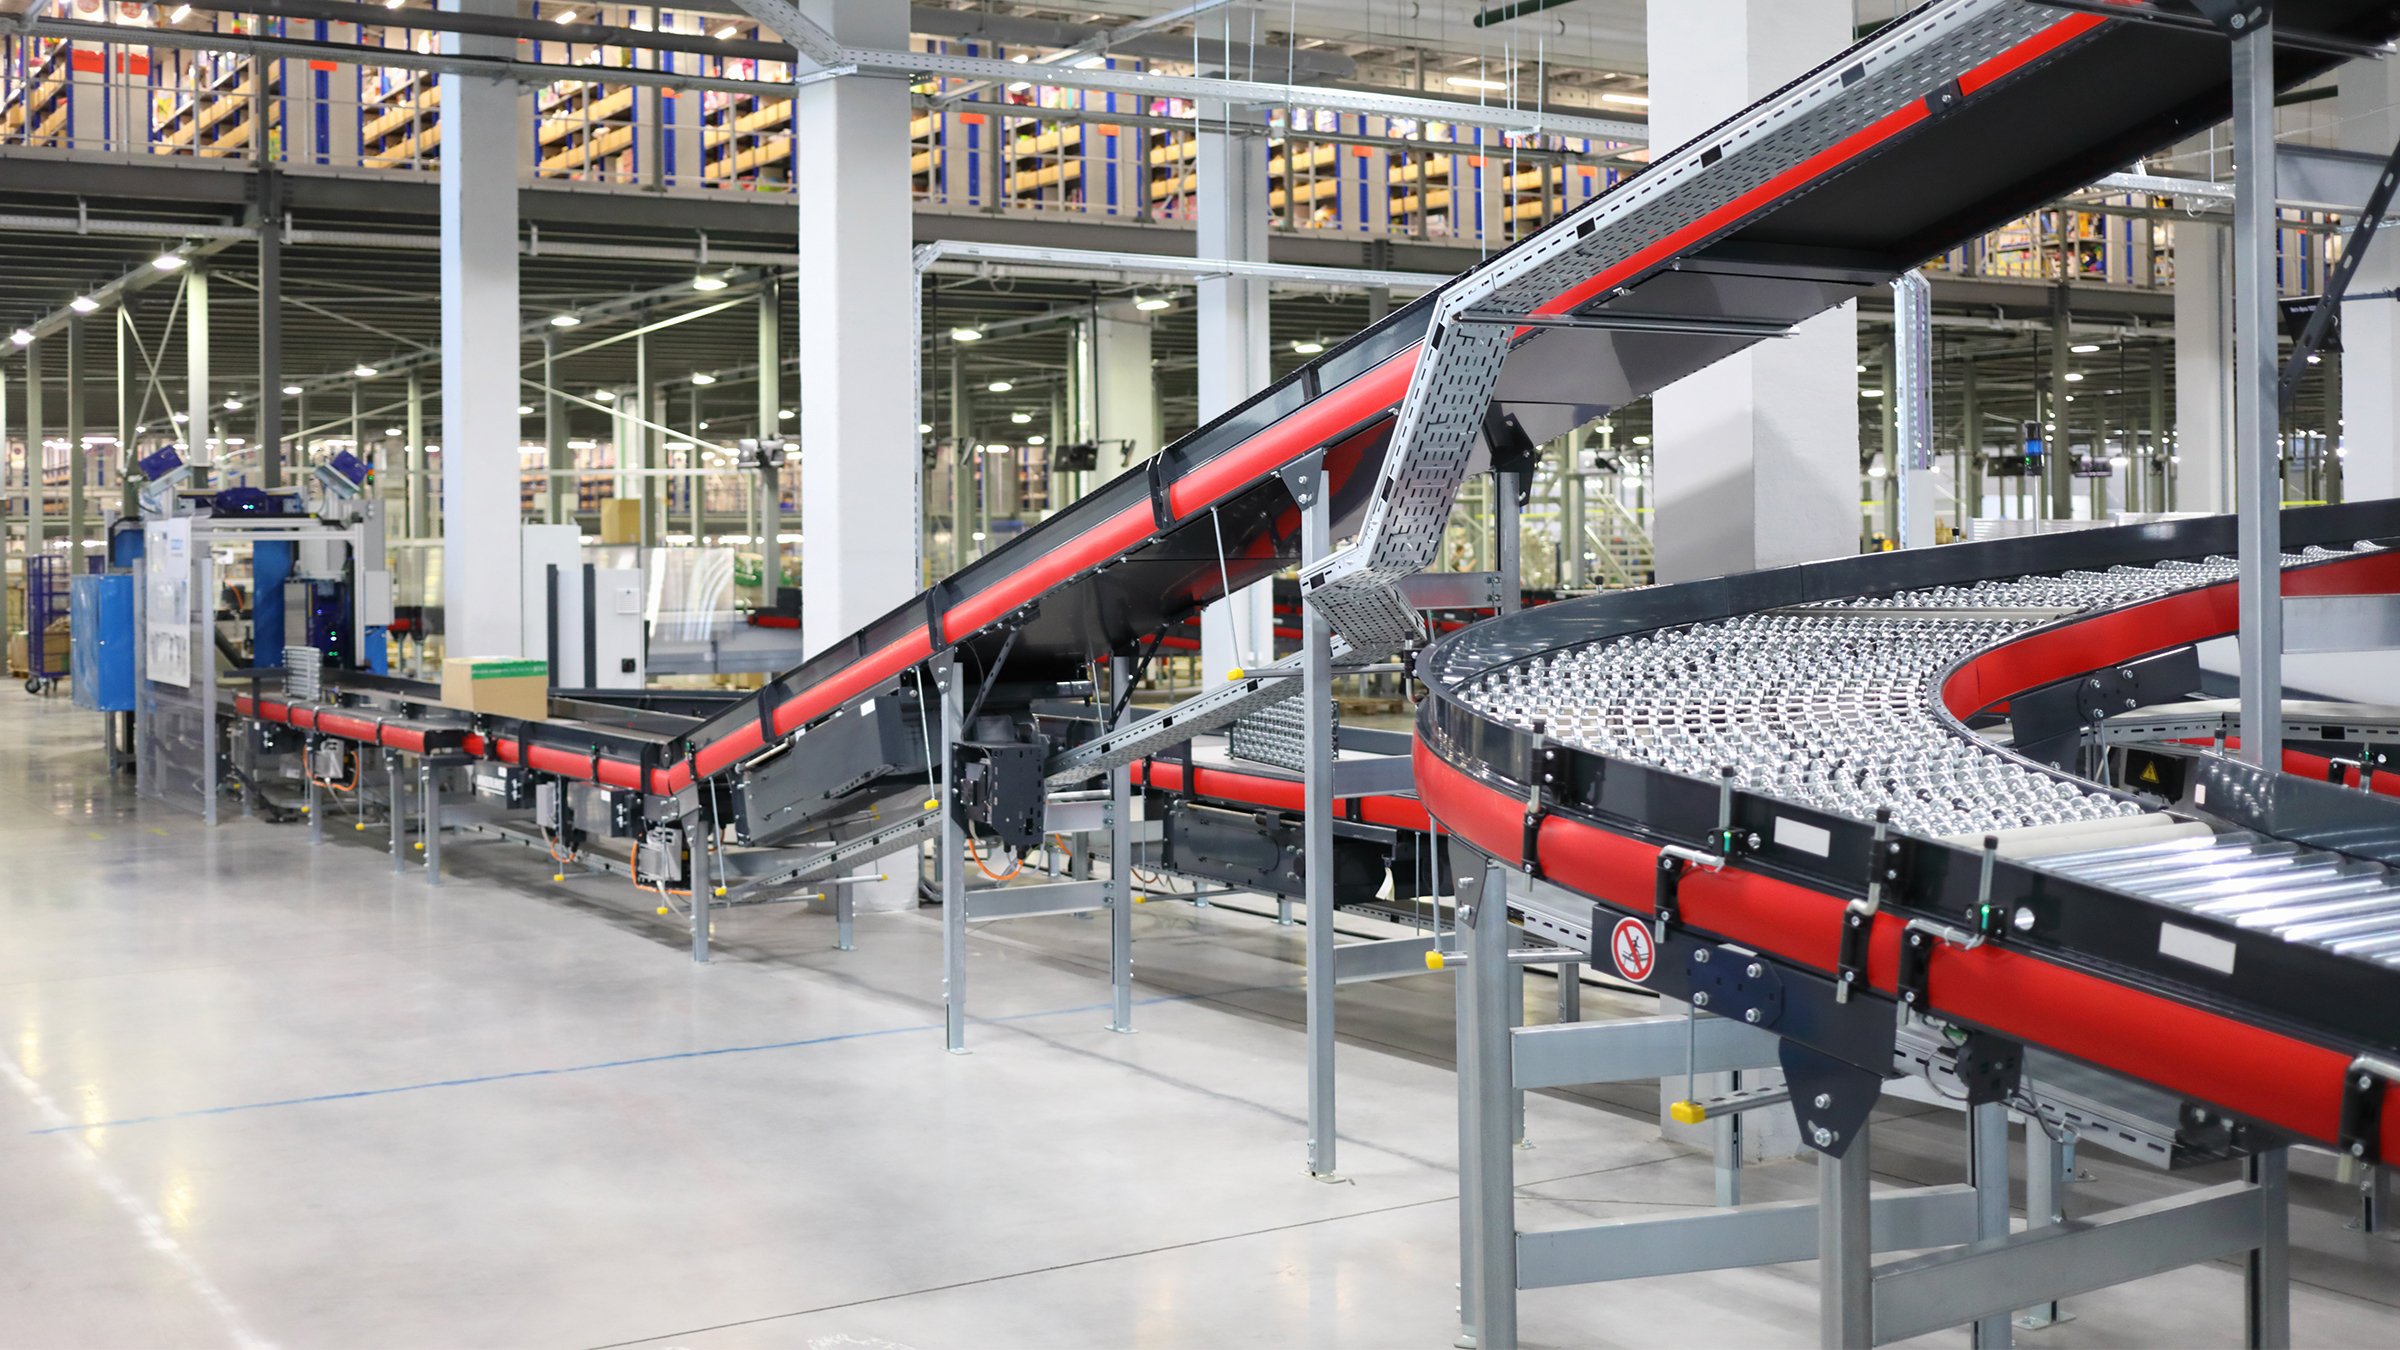 Large warehouse with a metal conveyor transporting goods